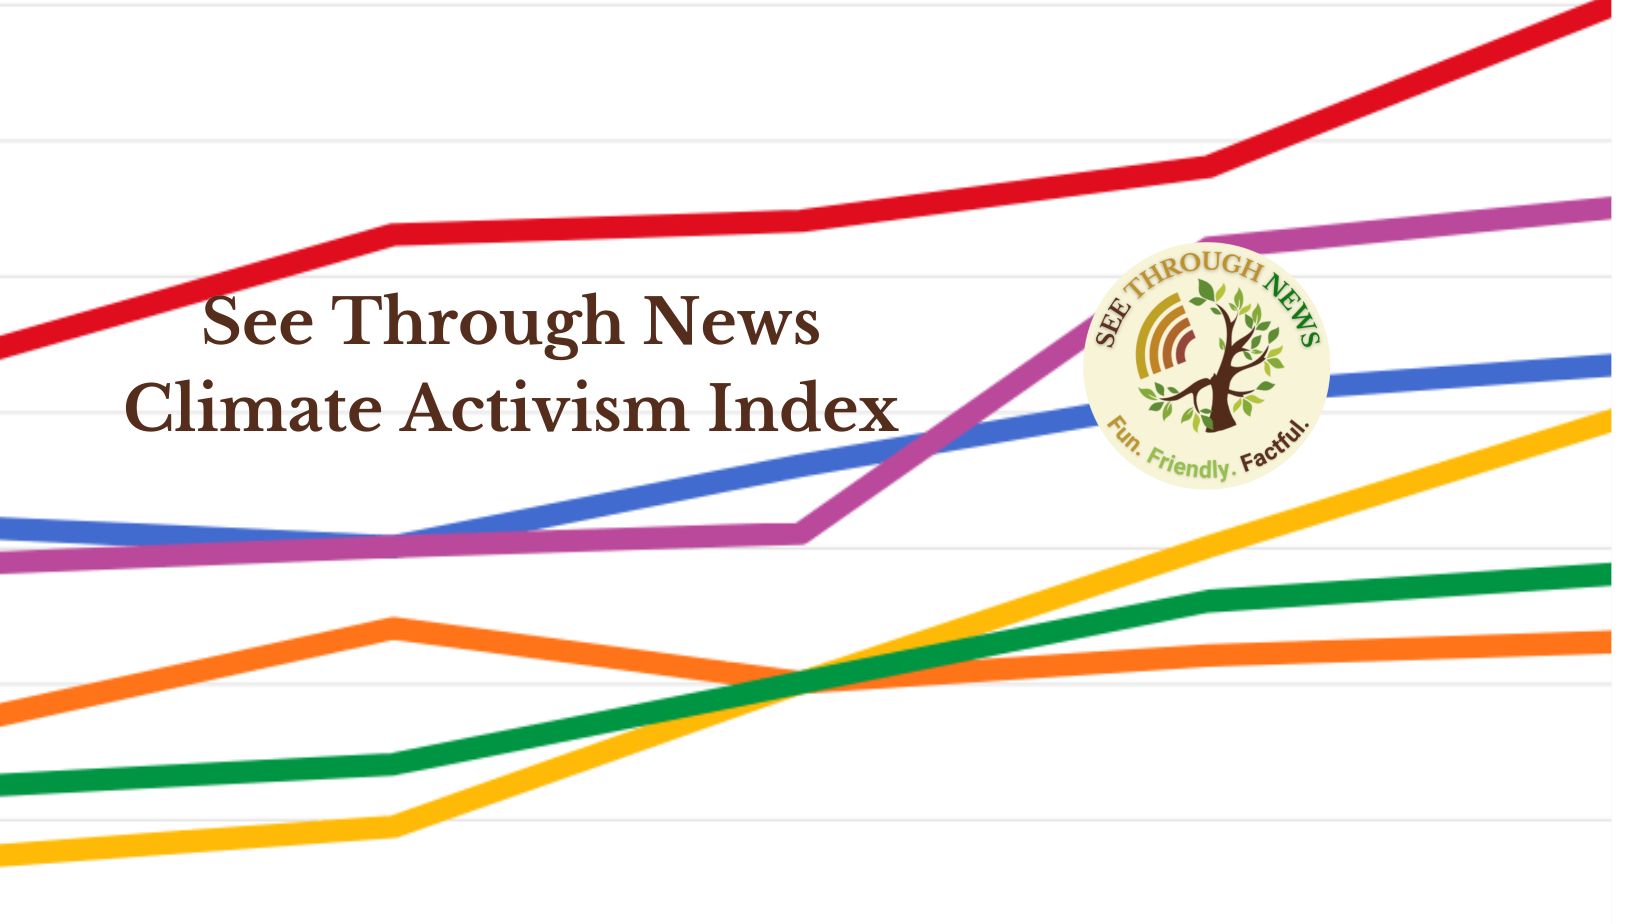 climate activism index see through news greenwashing effective climate action